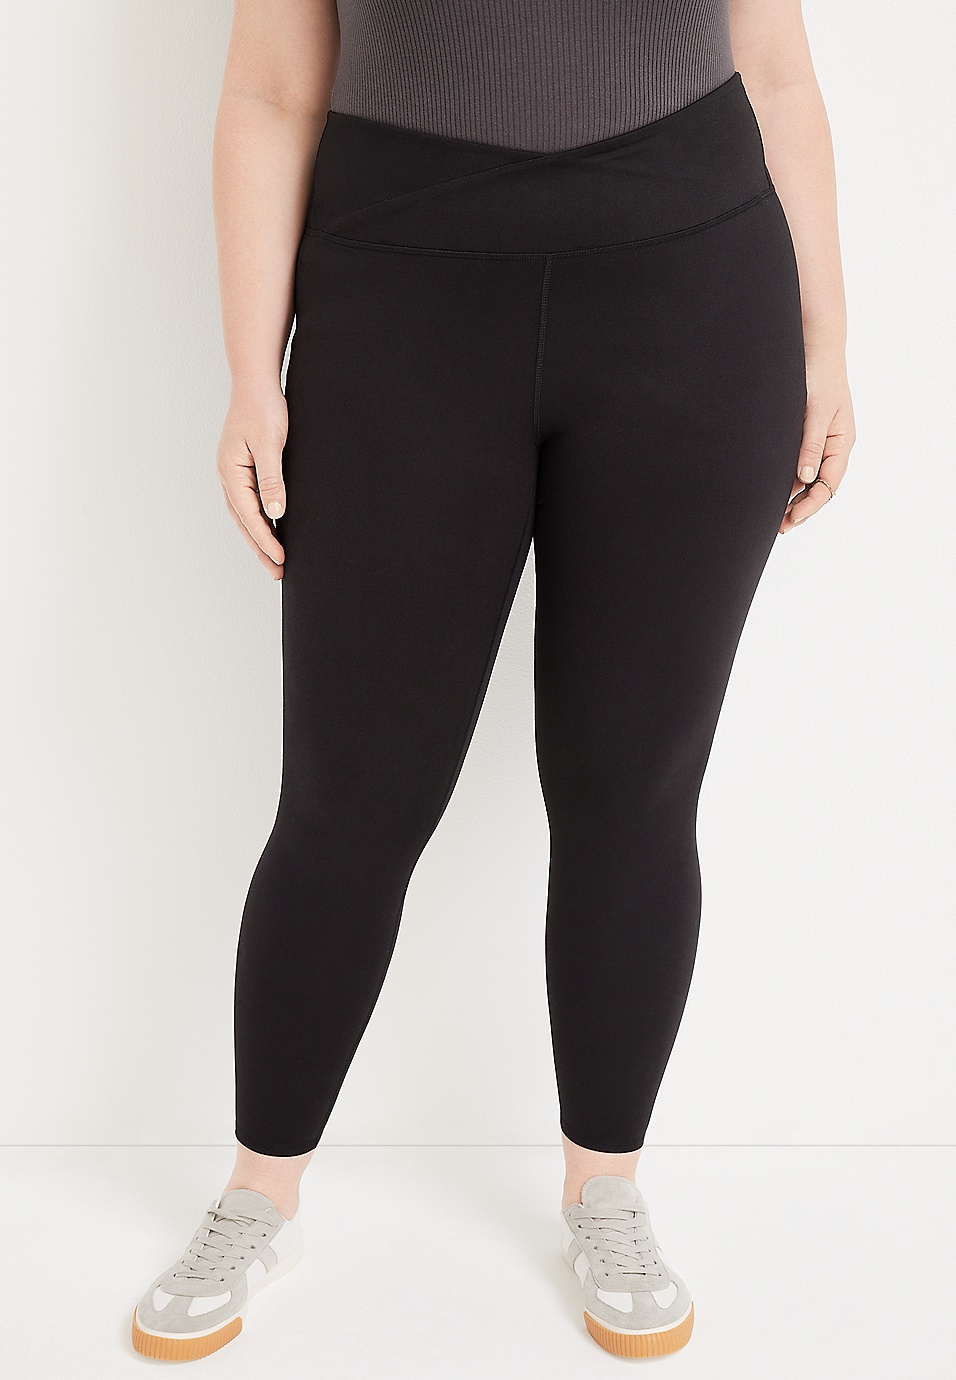 Buy Women's Plus Size Cropped Leggings with Elasticised Waistband Online